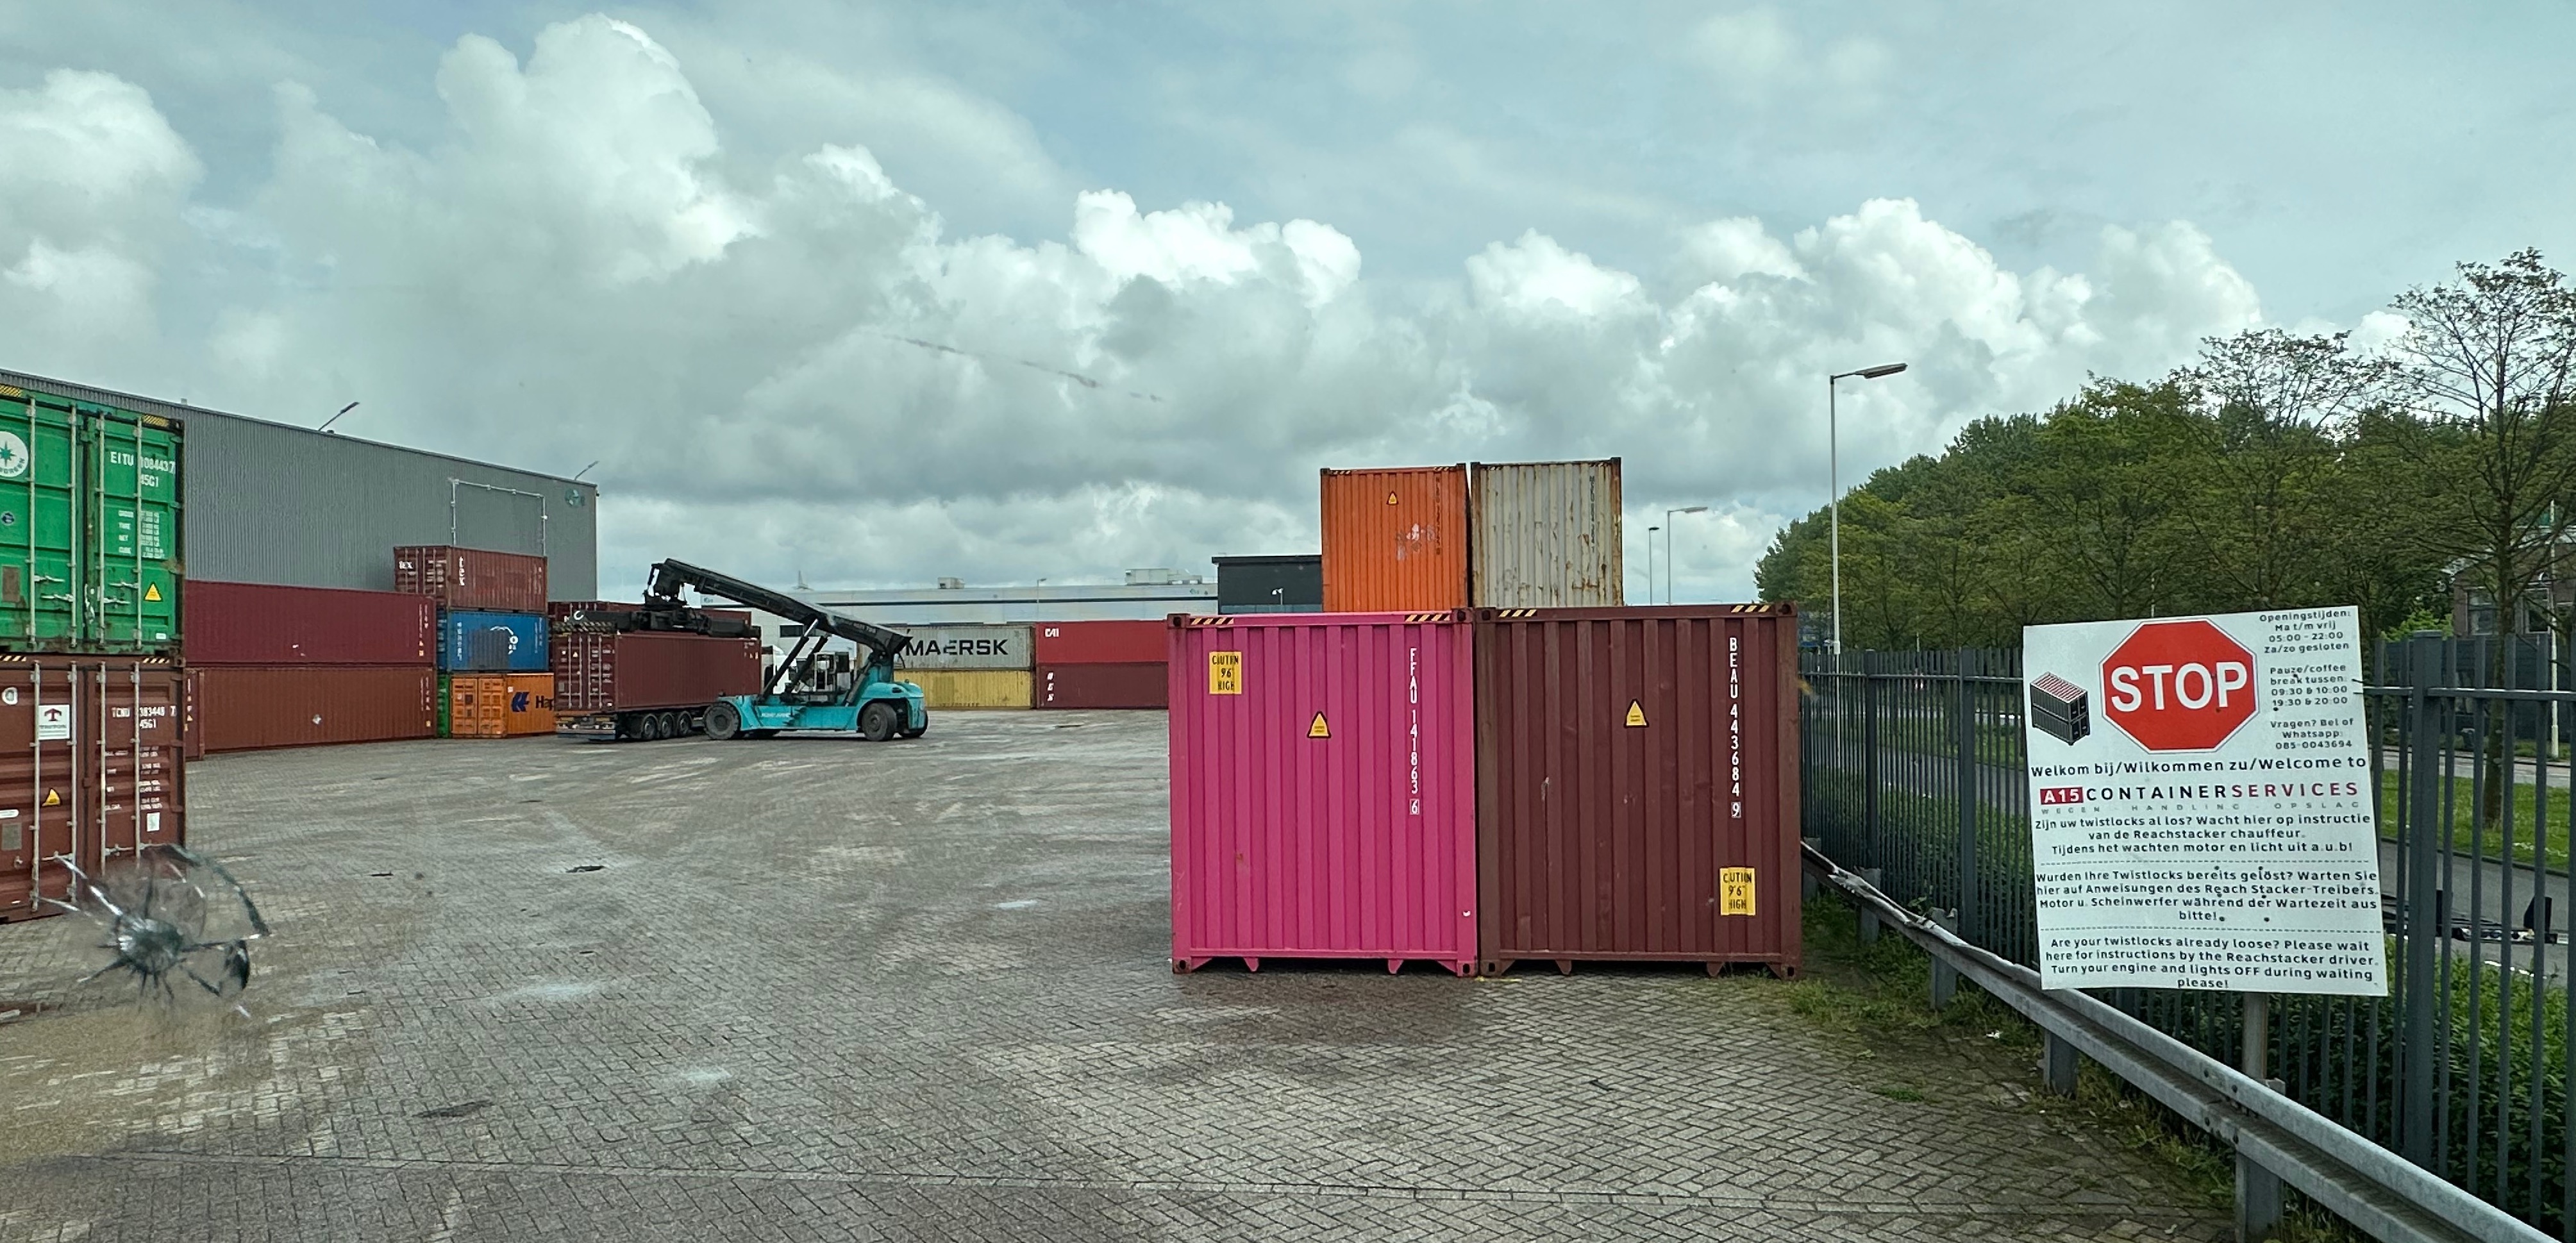 A15 Containerservices (former Design Logistics)